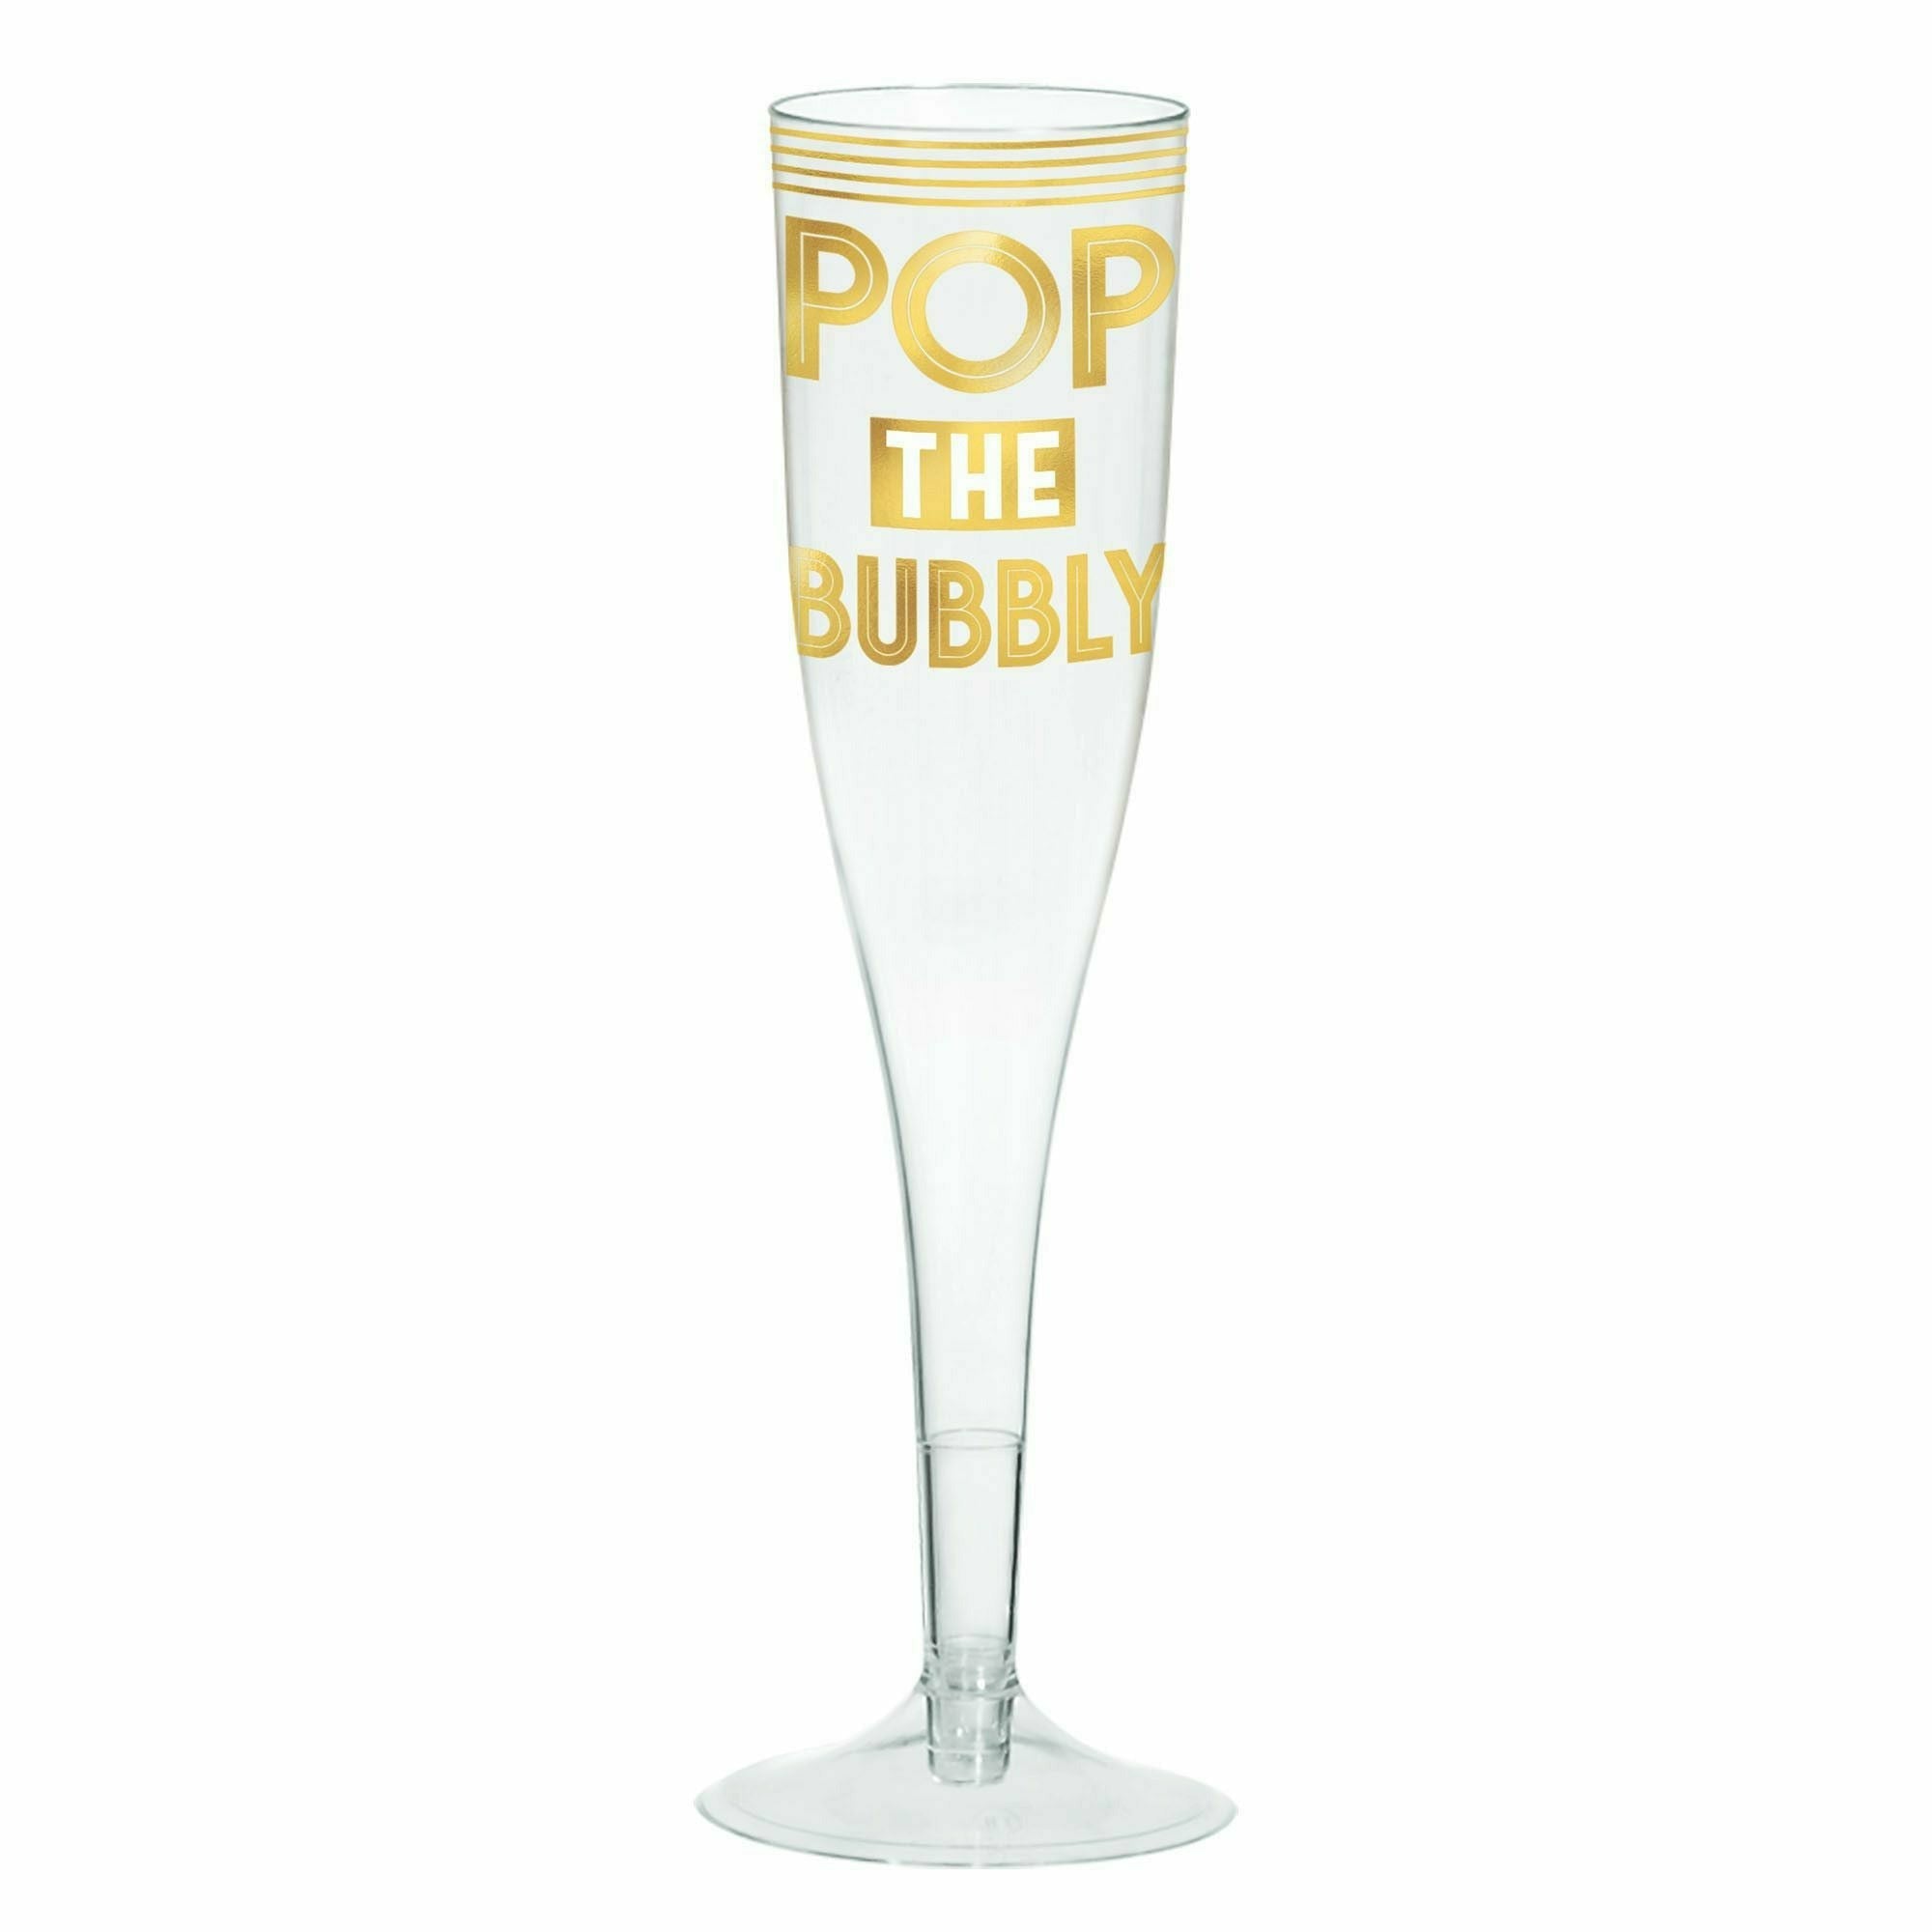 Amscan HOLIDAY: NEW YEAR'S Pop The Bubbly Champagne Glasses, Hot-Stamped, Multi-Pack